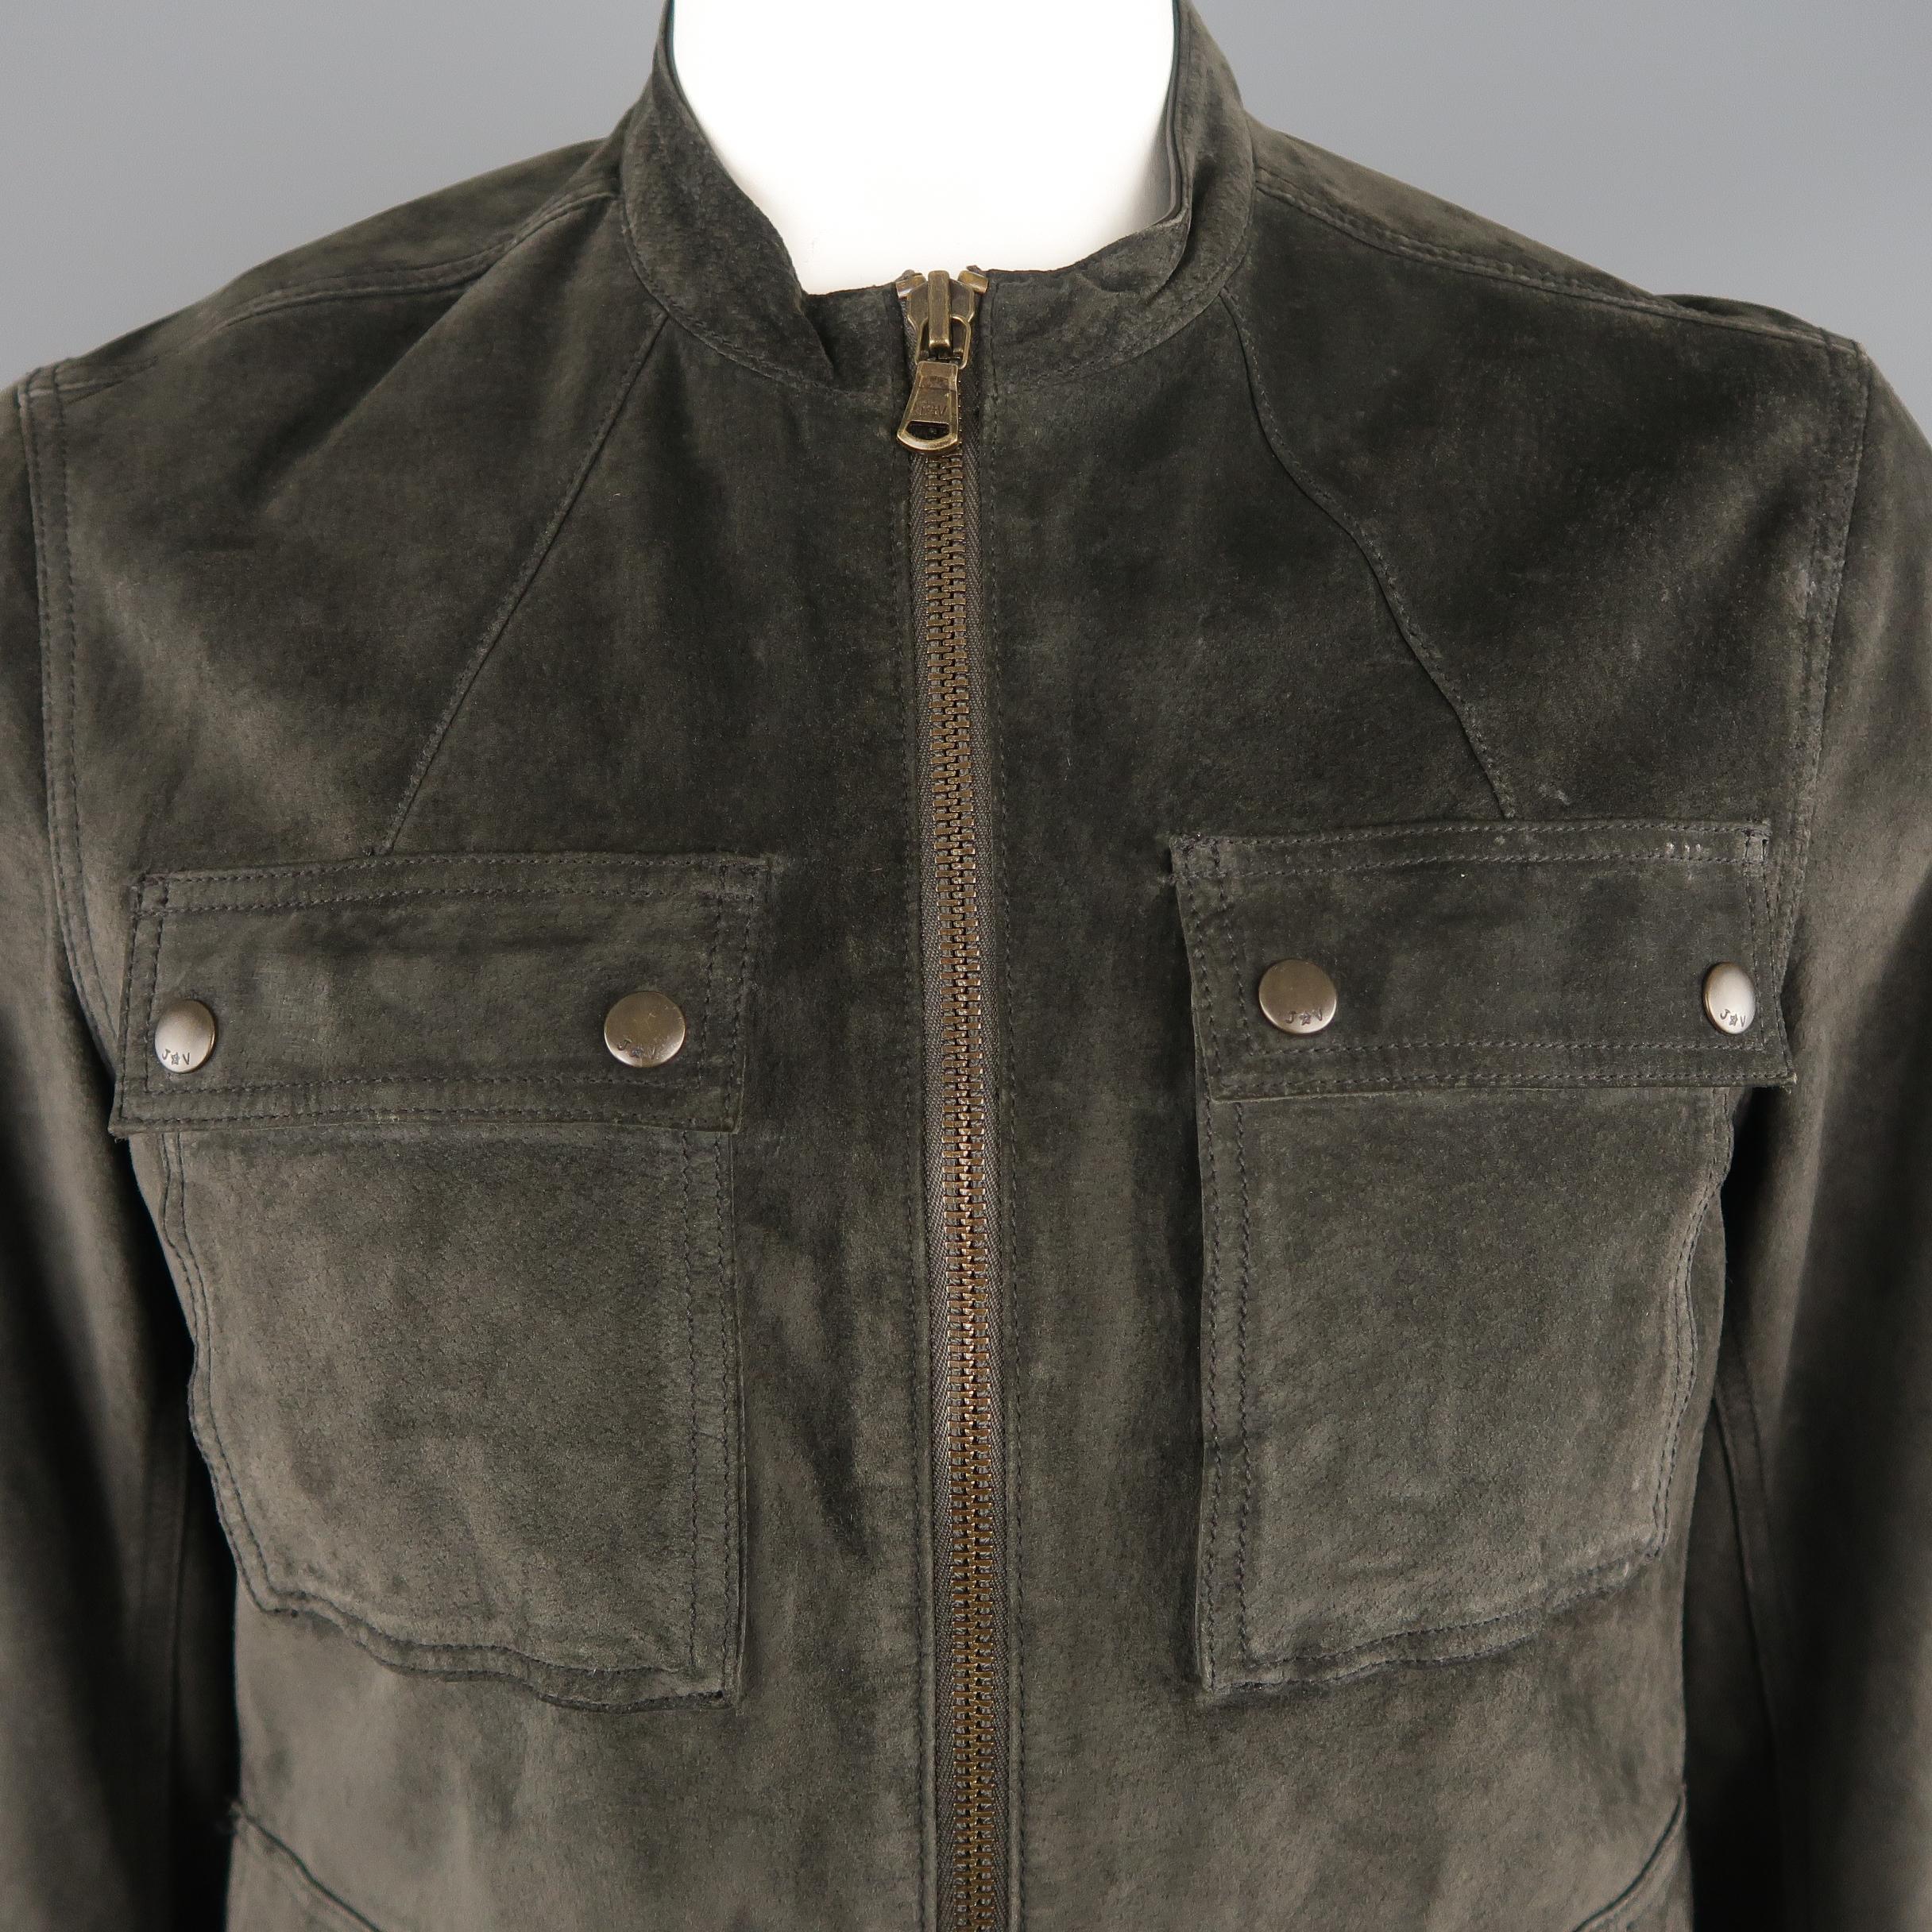 JOHN VARVATOS  jacket comes in charcoal tone in solid suede material, with front patch pockets, zip cuffs, zip up. Minor wear. Made in USA.
 
Excellent Pre-Owned Condition.
Marked: L
 
Measurements:
 
Shoulder:  17  in.
Chest: 45  in.
Sleeve: 26.5 